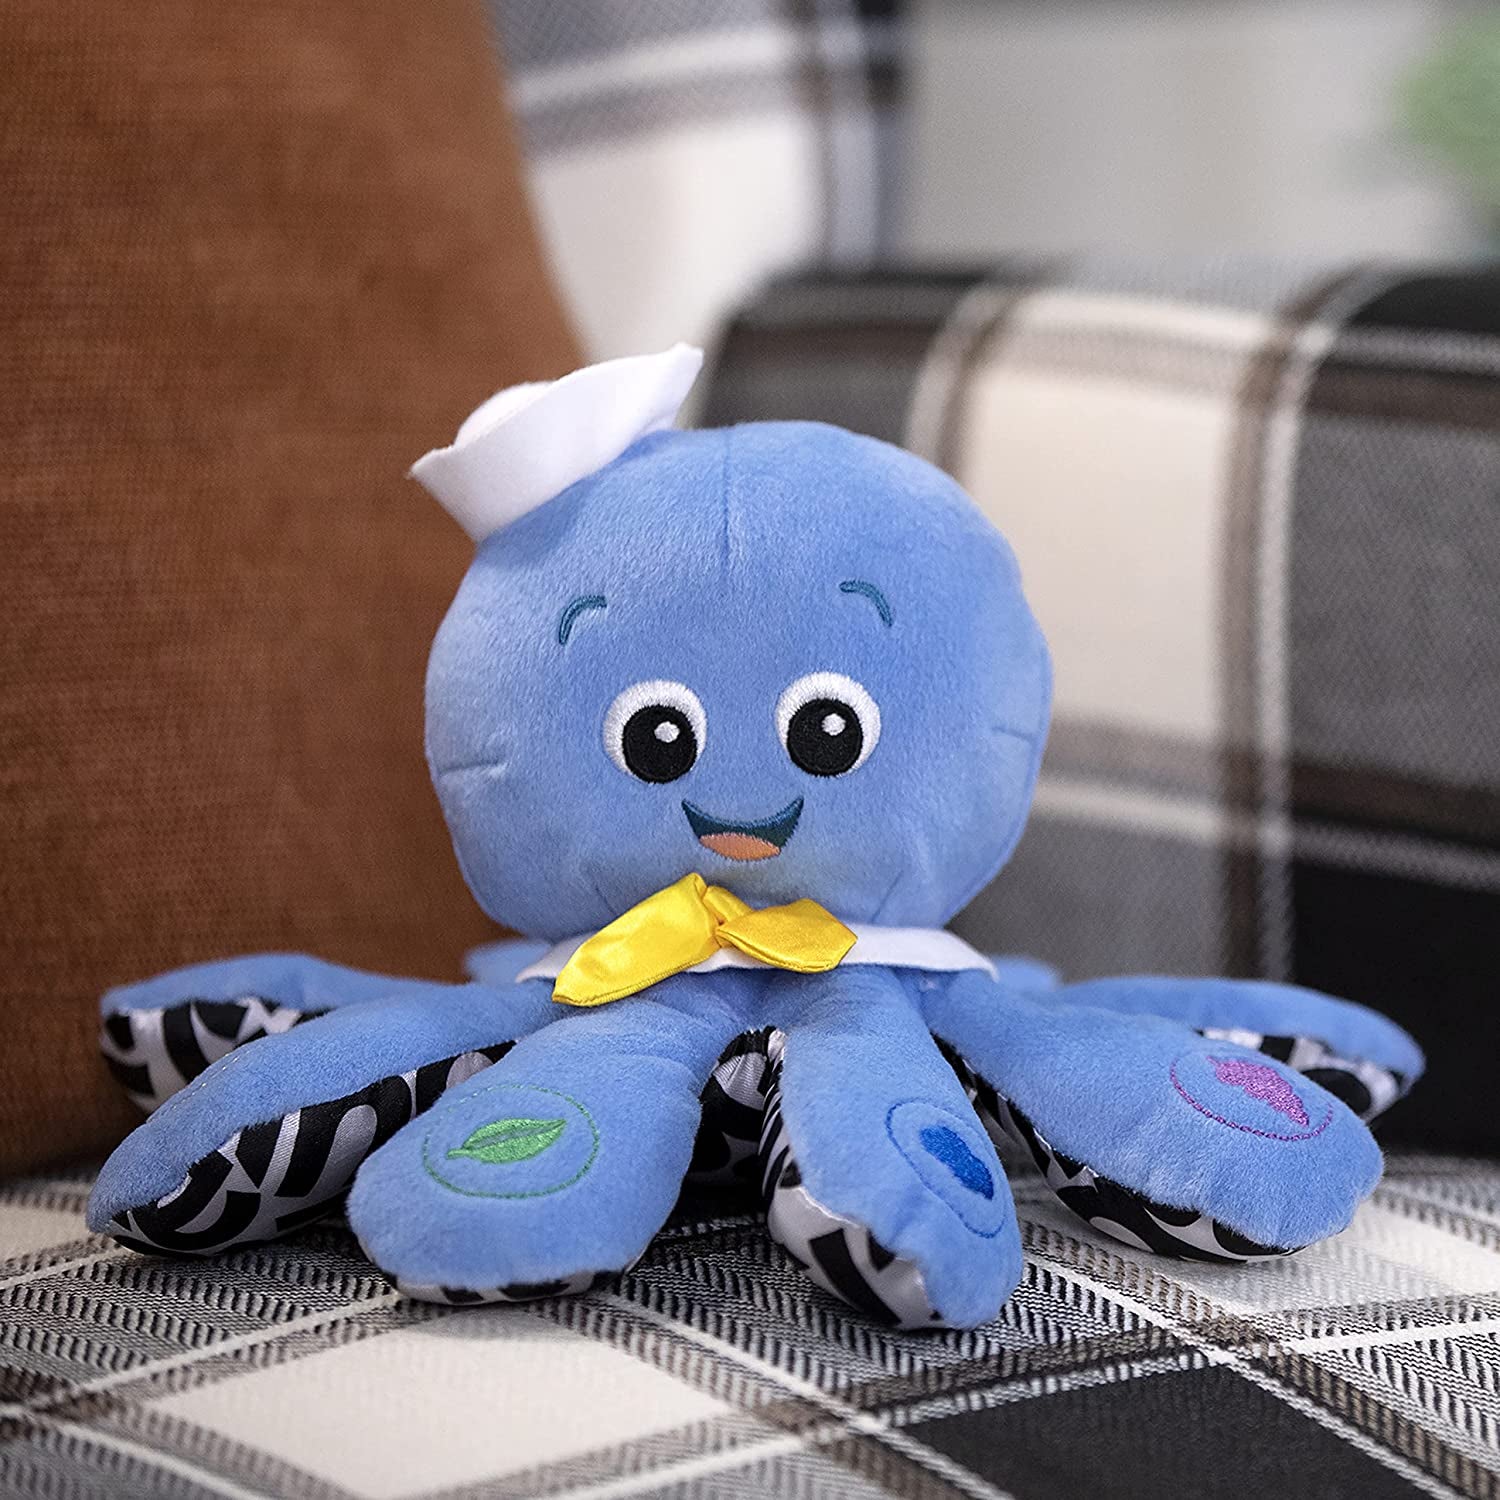 Baby Einstein, Octoplush Musical Octopus Stuffed Animal Plush Toy, 25+ Melodies & Sounds, 3 Languages, Educational Promotes Colour Discovery, Toddler Toy, with Volume Control, Age 3 Month+, Blue